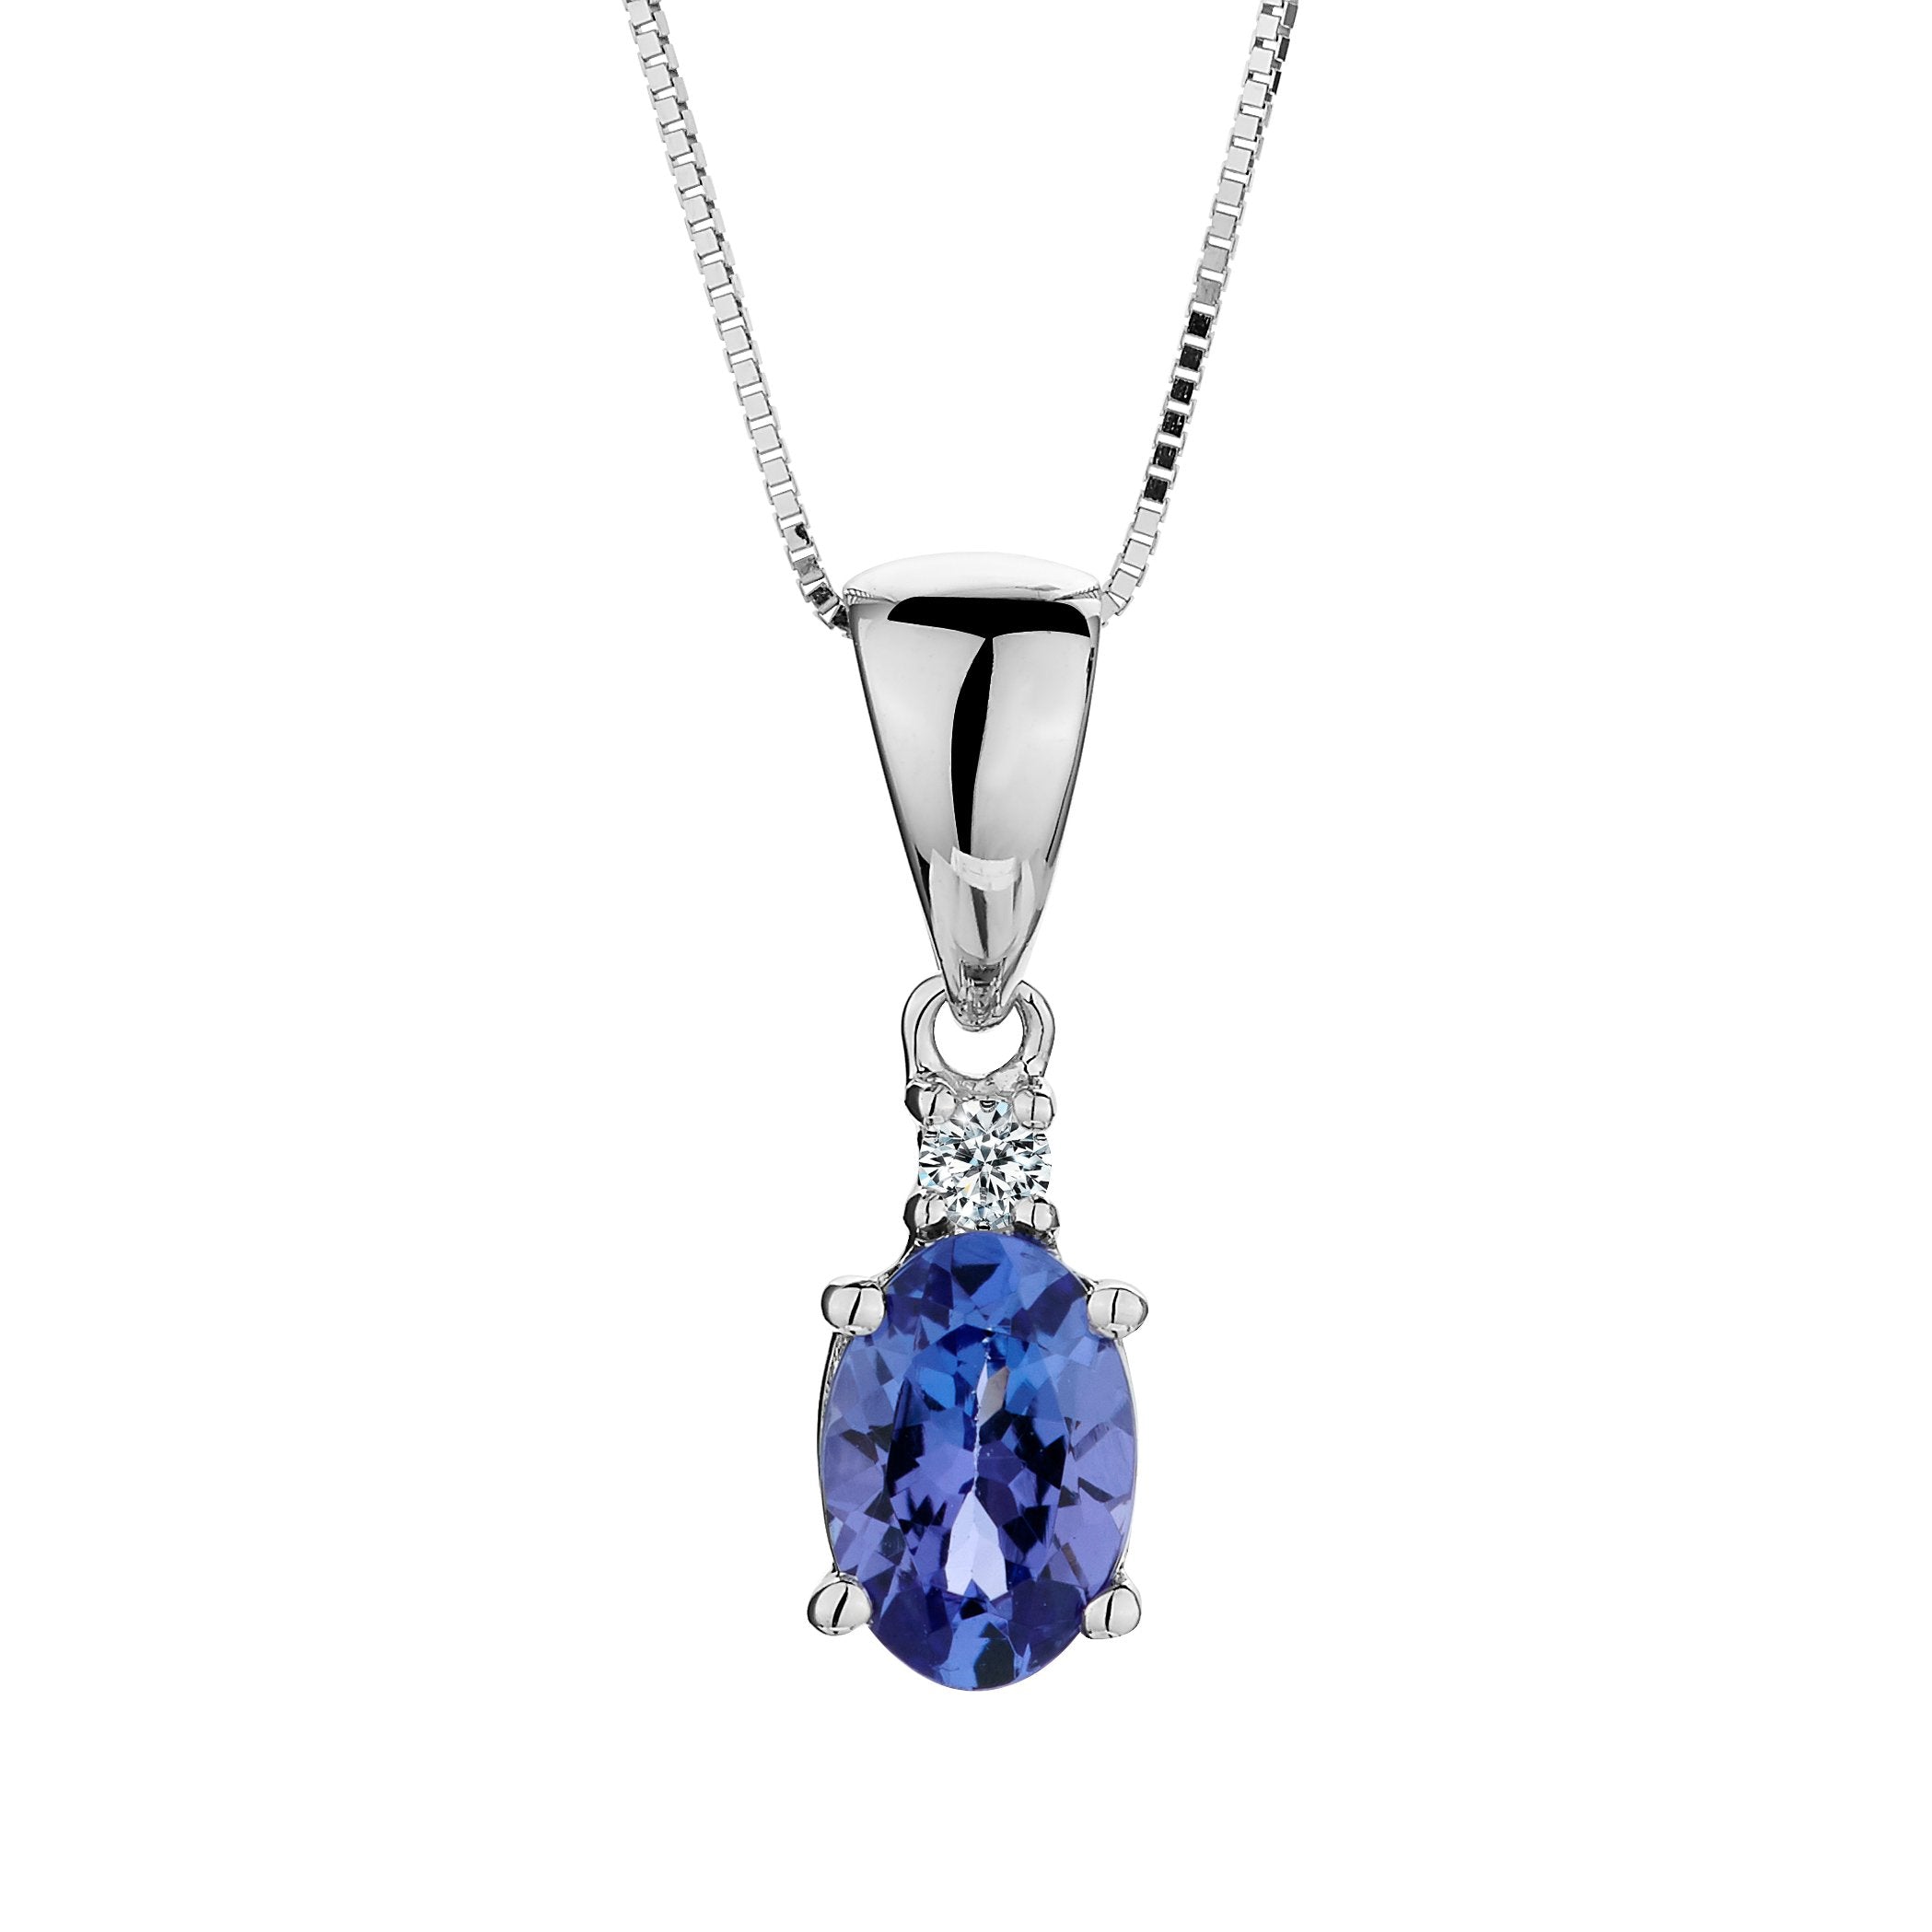 Tanzanite and .03TDW Diamond Pendant,  10kt White Gold. Necklaces and Pendants. Griffin Jewellery Designs. 